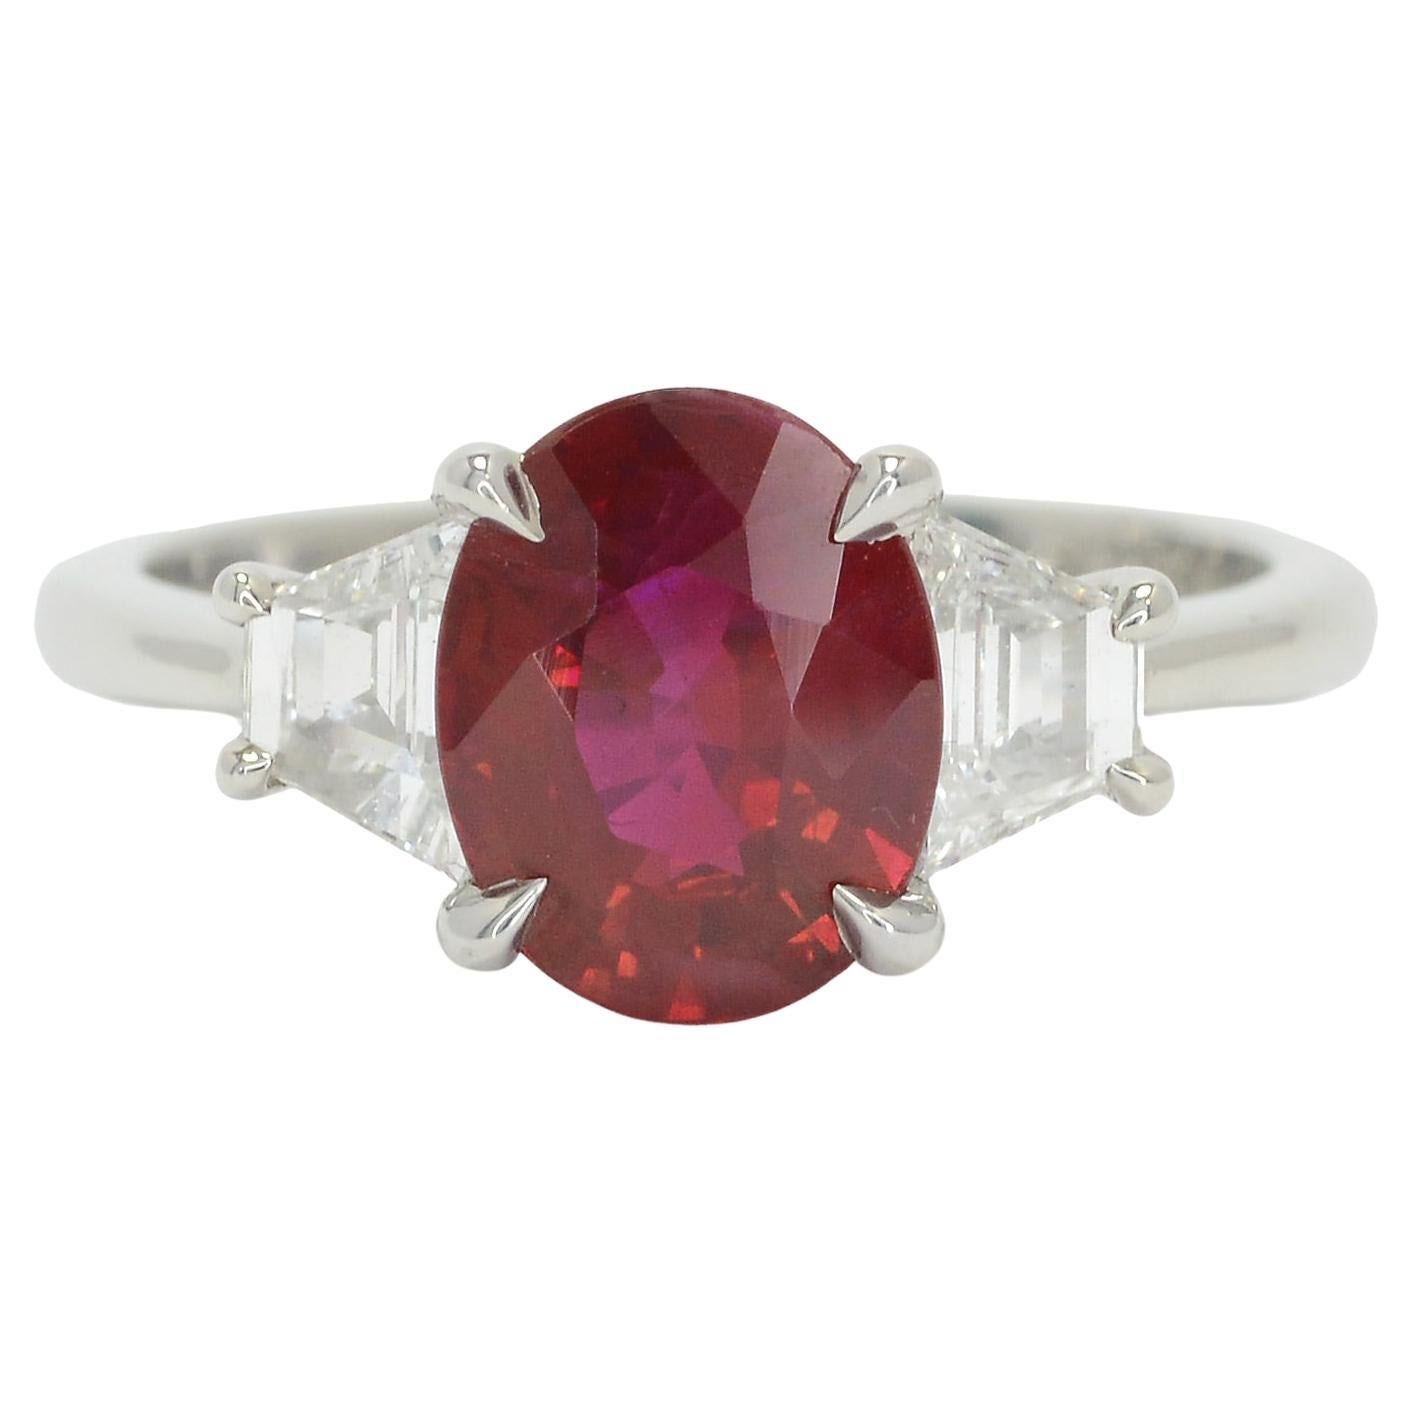 GIA Certified 2.25 Carat Burma Ruby Engagement Ring Solitaire Pigeon Blood Red